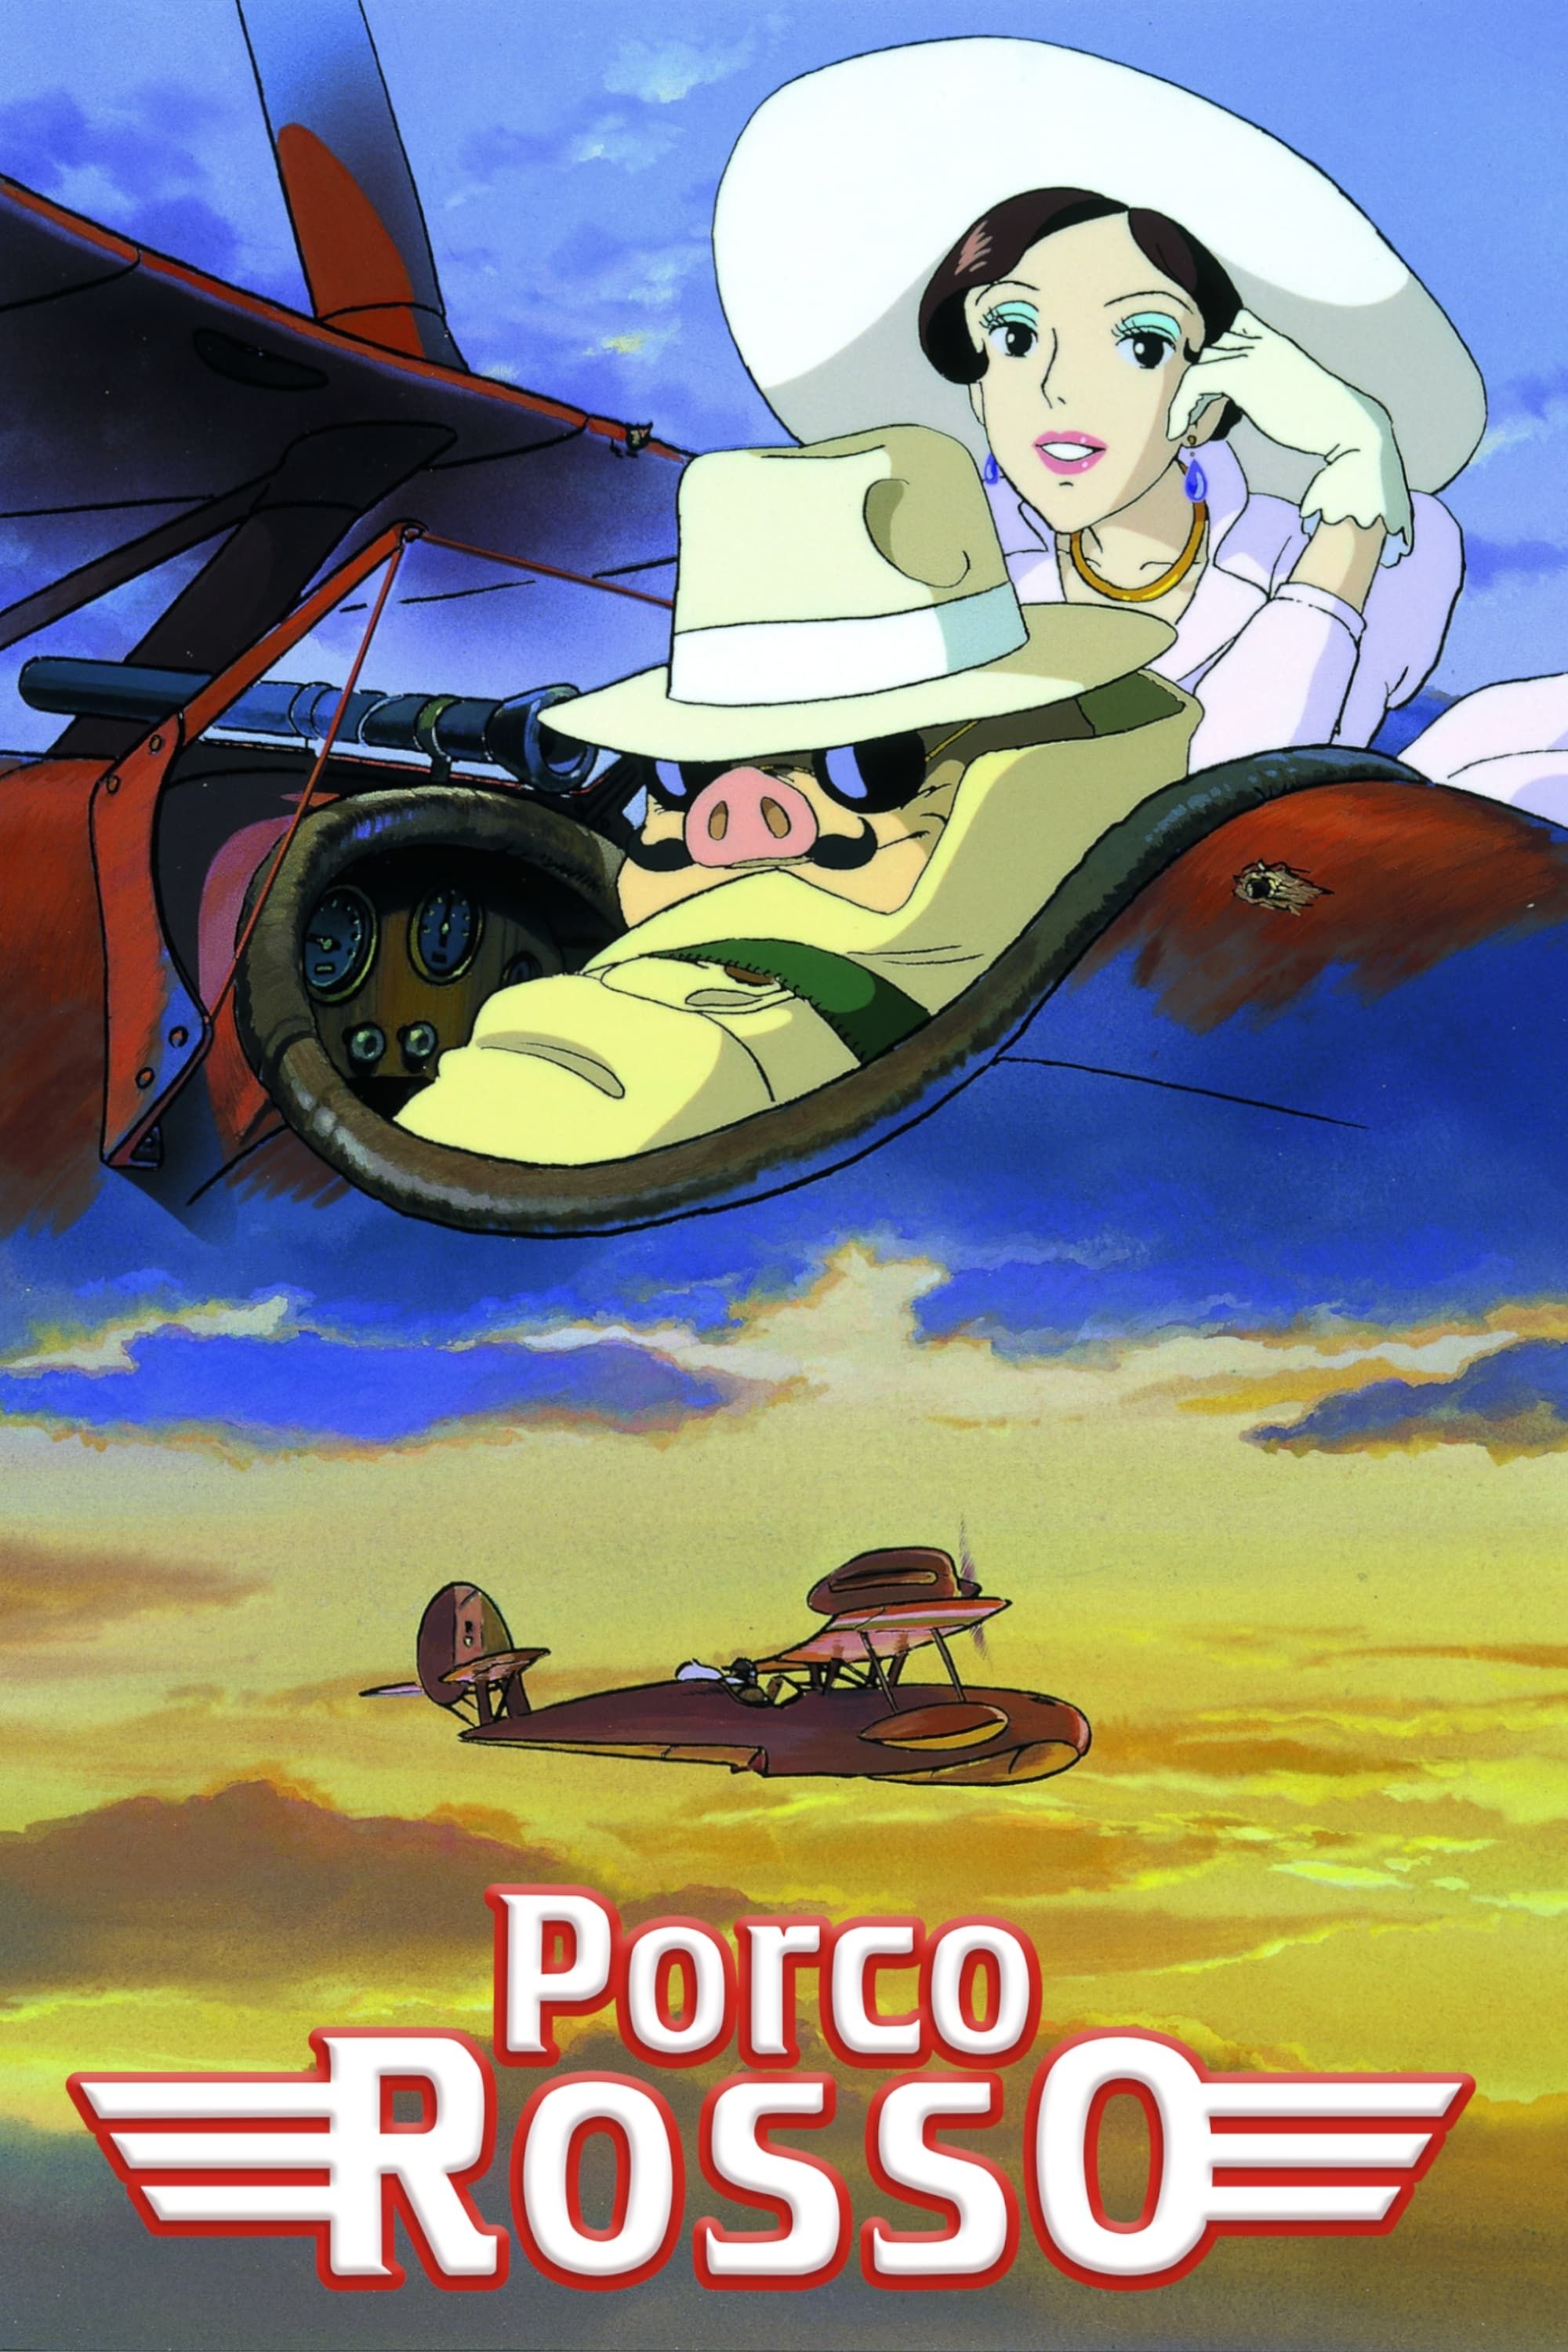 Porco Rosso (Movie) (Sub) Updated This Year